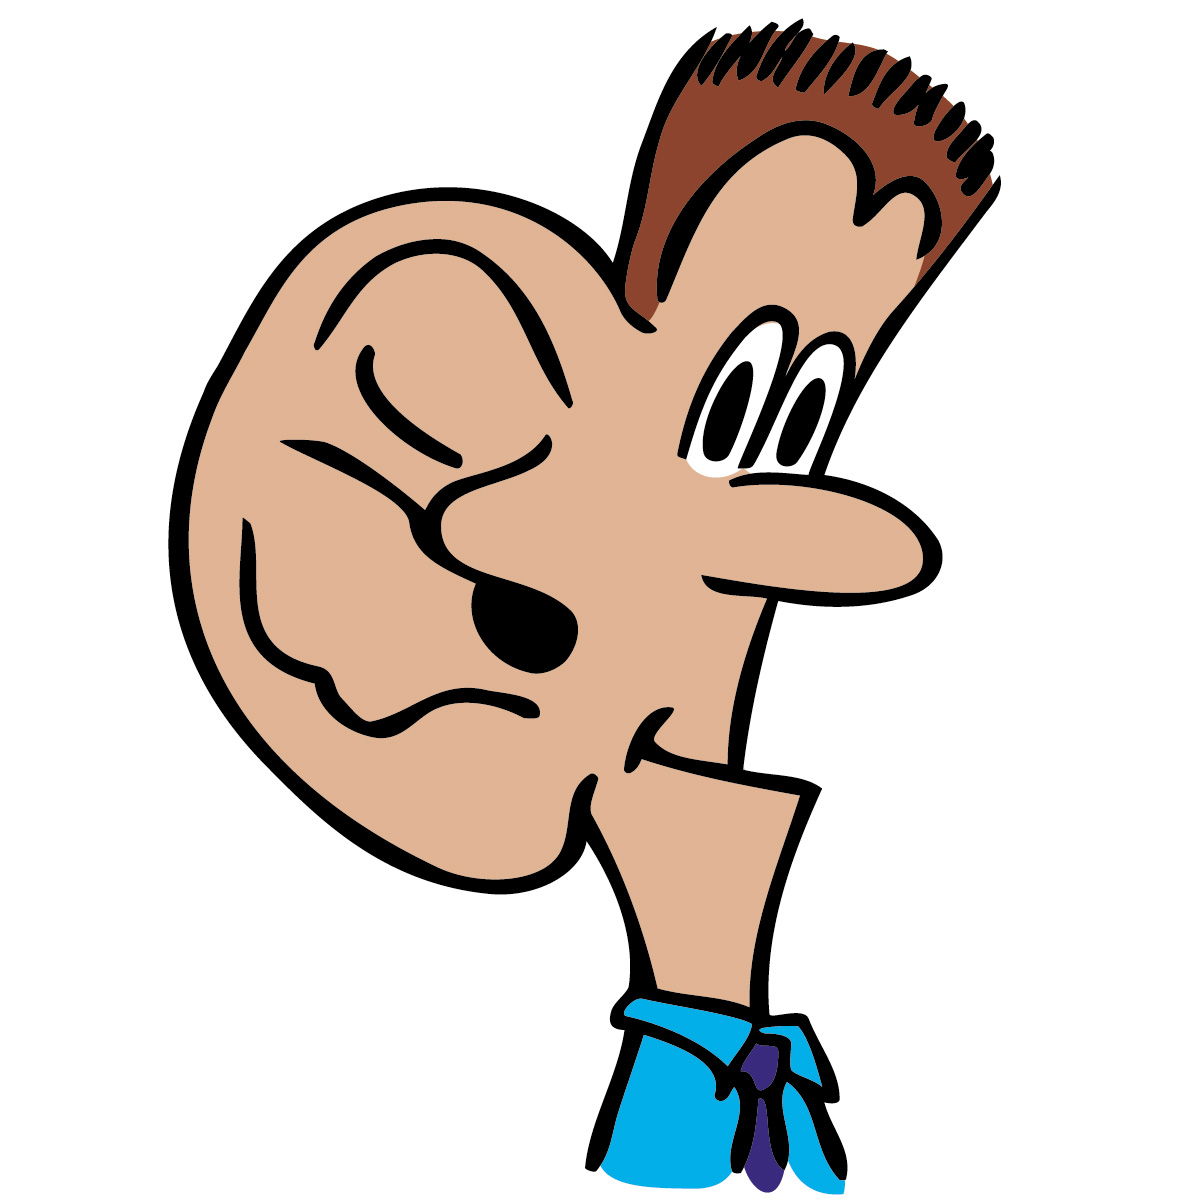 Pictures of a ear clipart - Cliparting.com